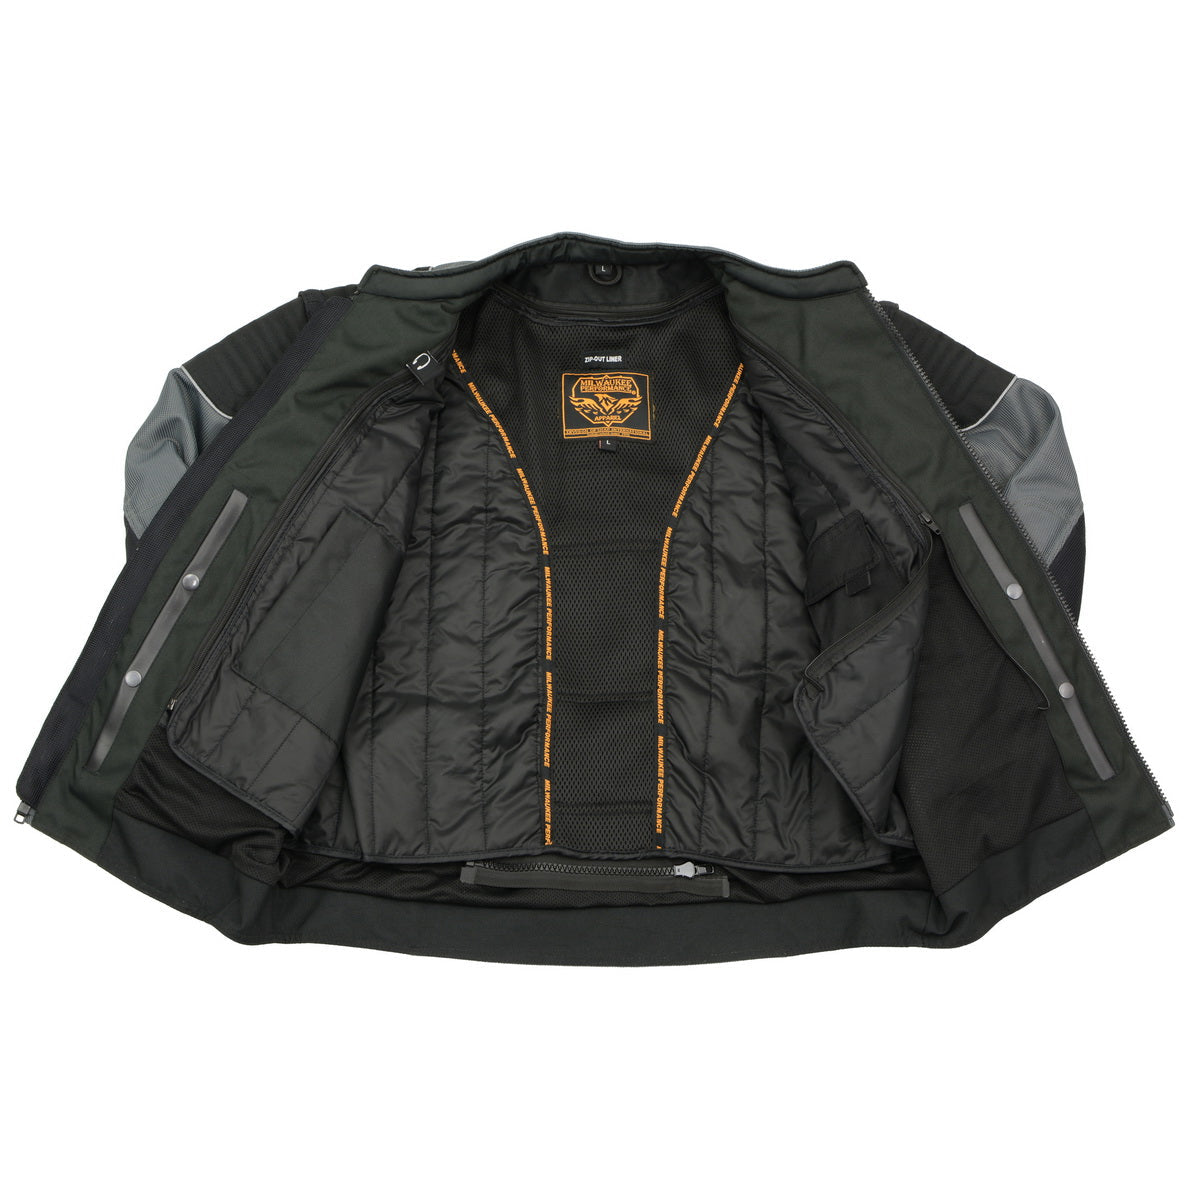 Milwaukee Leather MPM1752 Men's Black with Grey Textile and Mesh Armored Racing Jacket with Reflective Piping